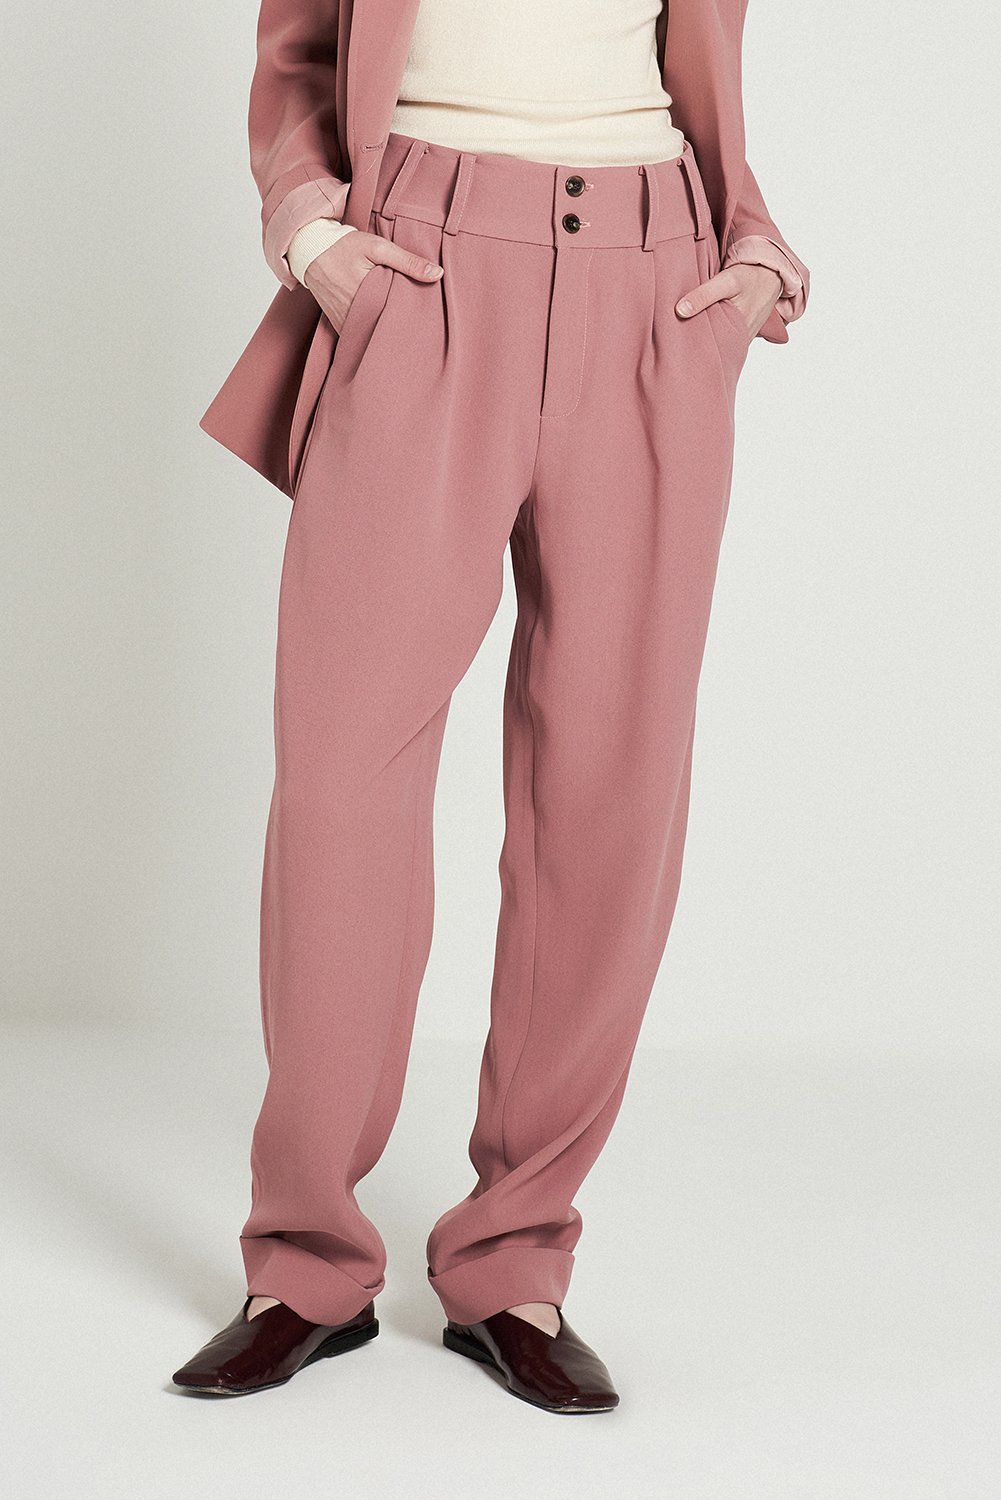 Suit Tapered Trouseres-Pink, $89.79